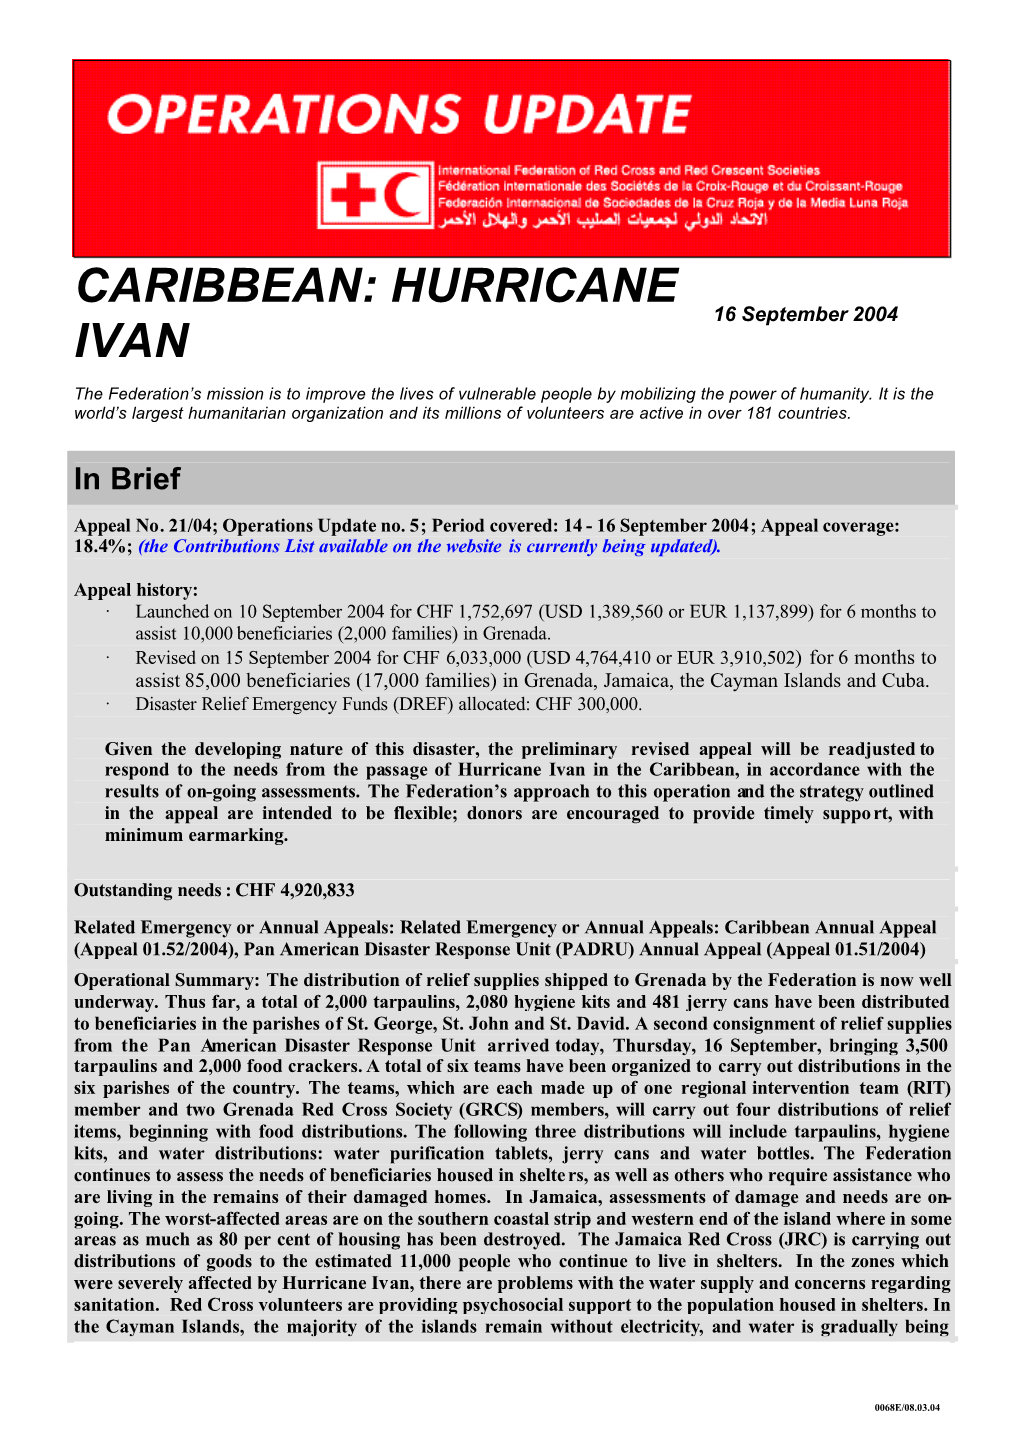 Hurricane Ivan in the Caribbean, in Accordance with the Results of On-Going Assessments